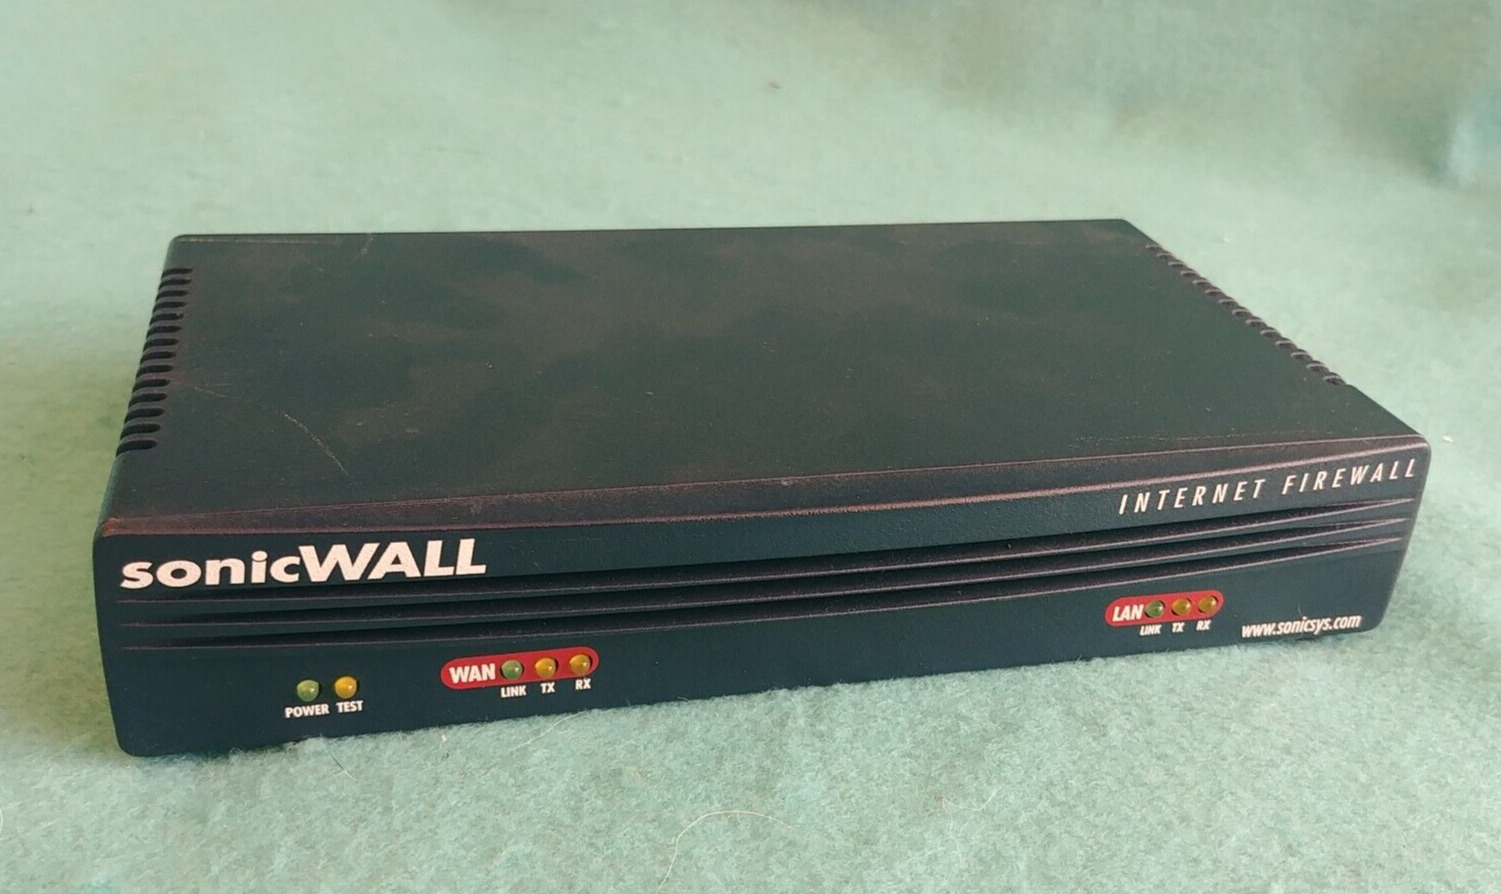 Sonicwall W50 Internet Security Firewall - No Adapter Available